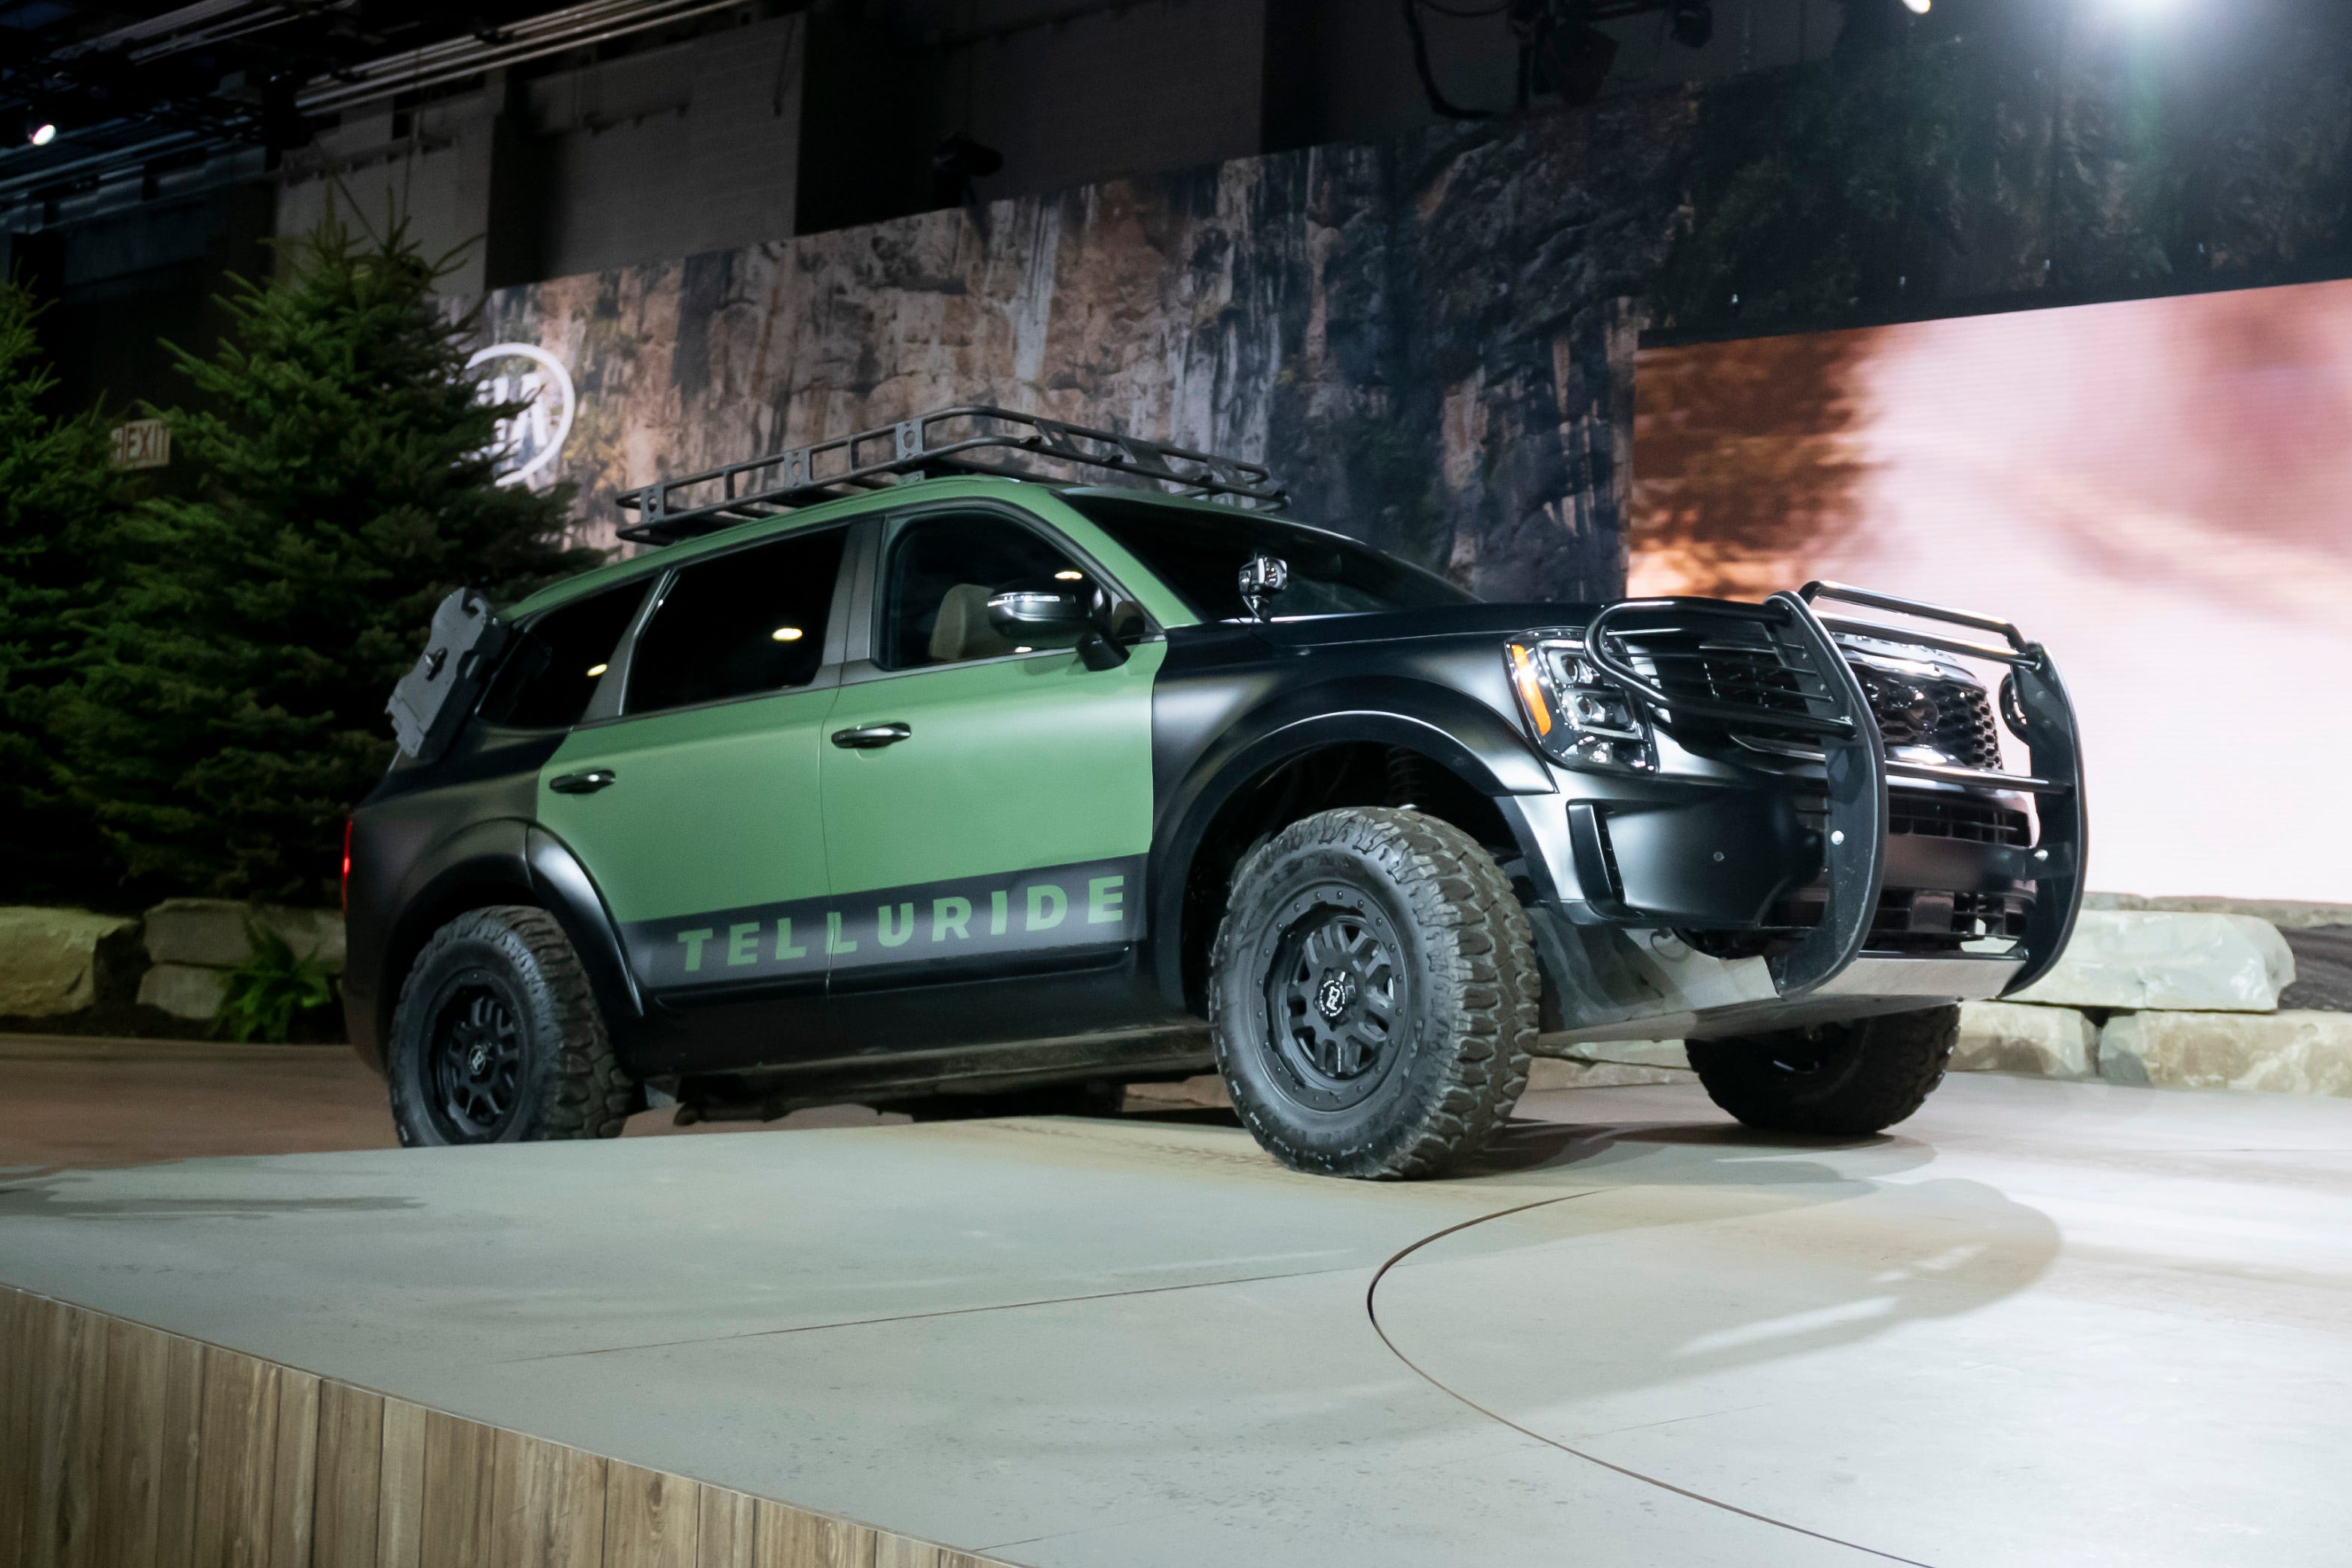 The 2020 Kia Telluride is driven on an off-road course during its introduction.